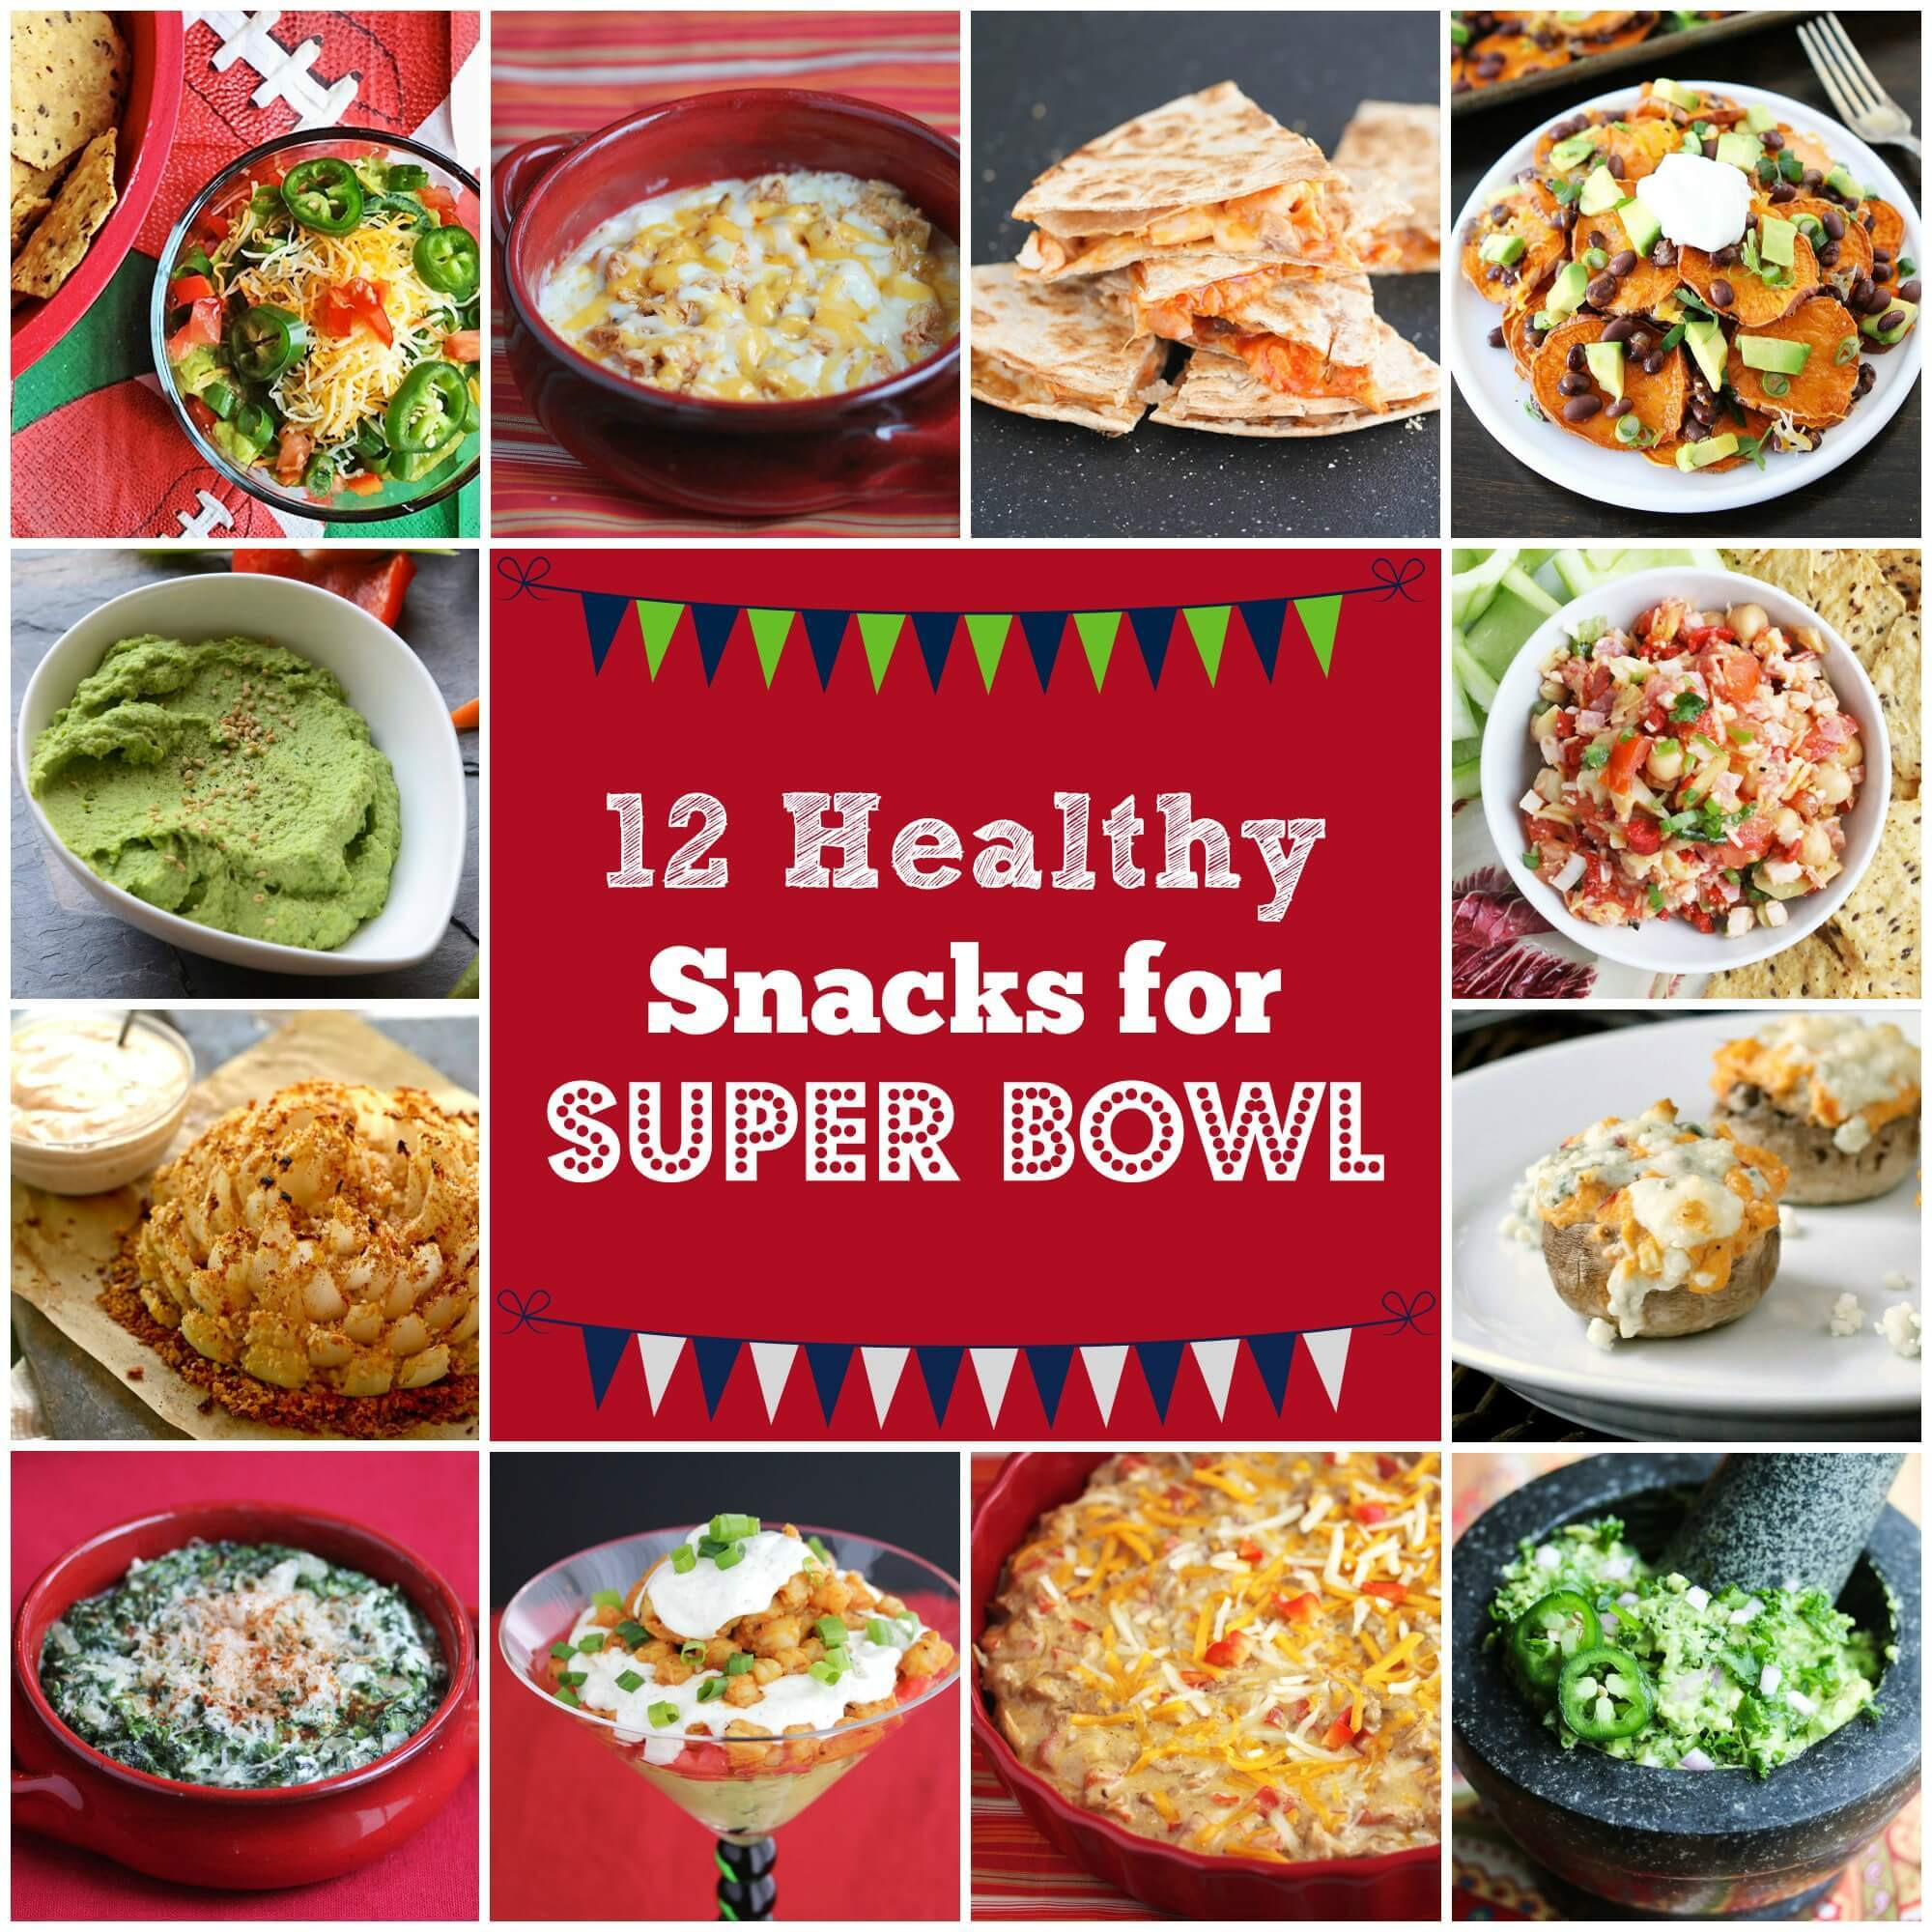 Super Bowl Recipes Healthy
 12 Healthy Super Bowl Snack Recipes Jeanette s Healthy